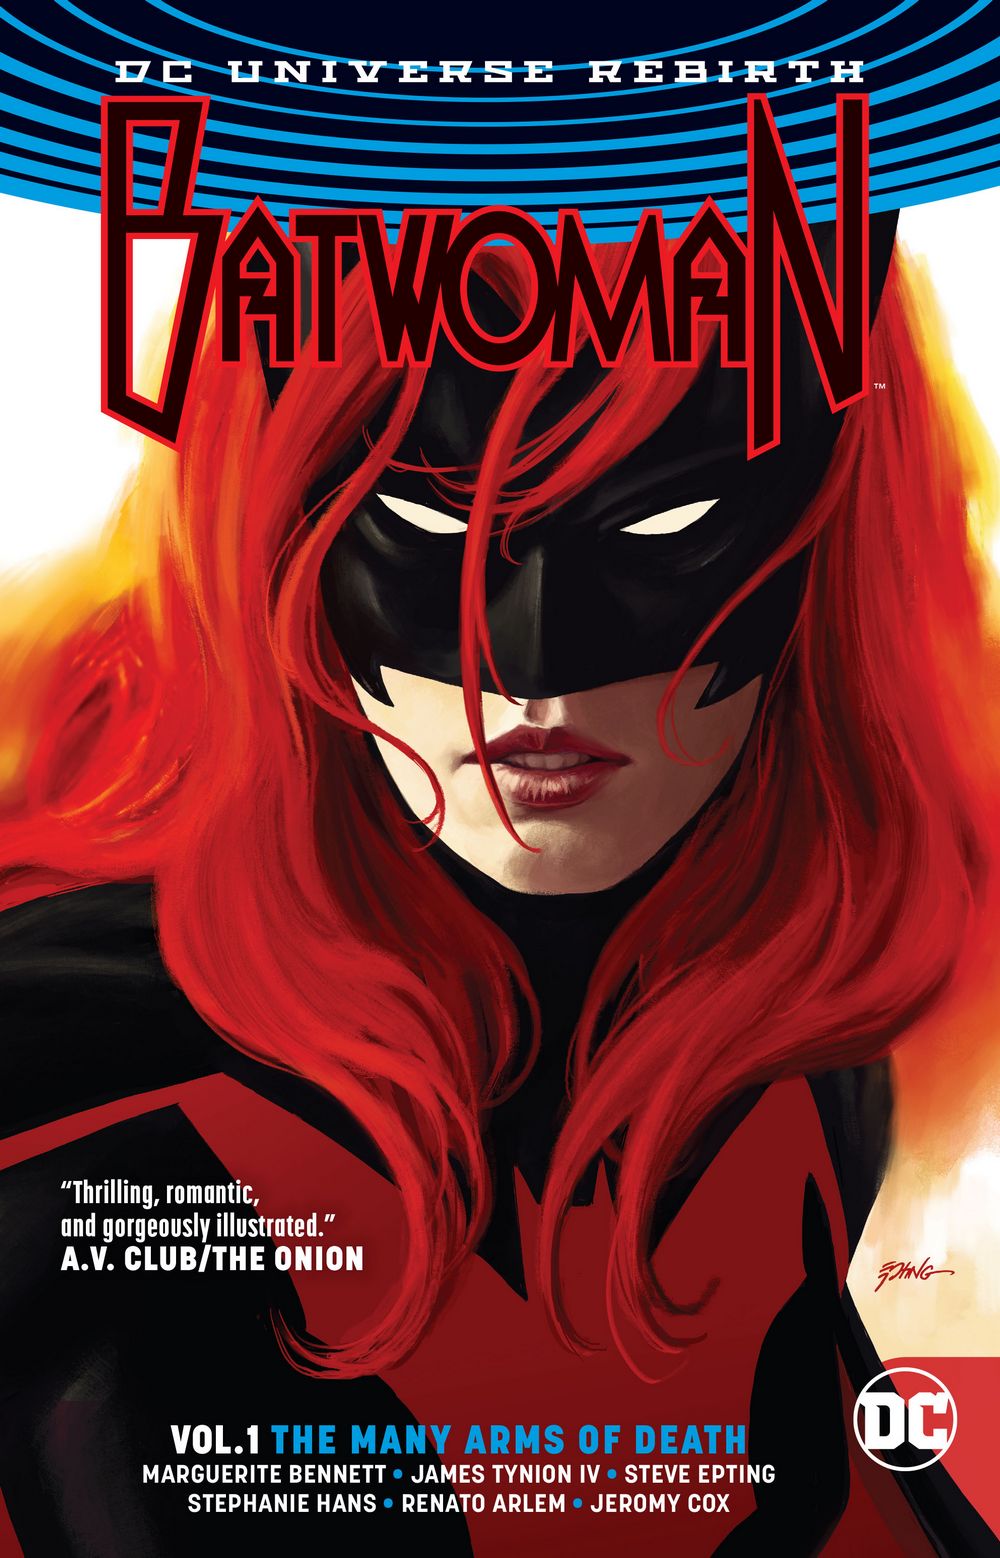 Batwoman TP VOL 01 the Many Arms of Death